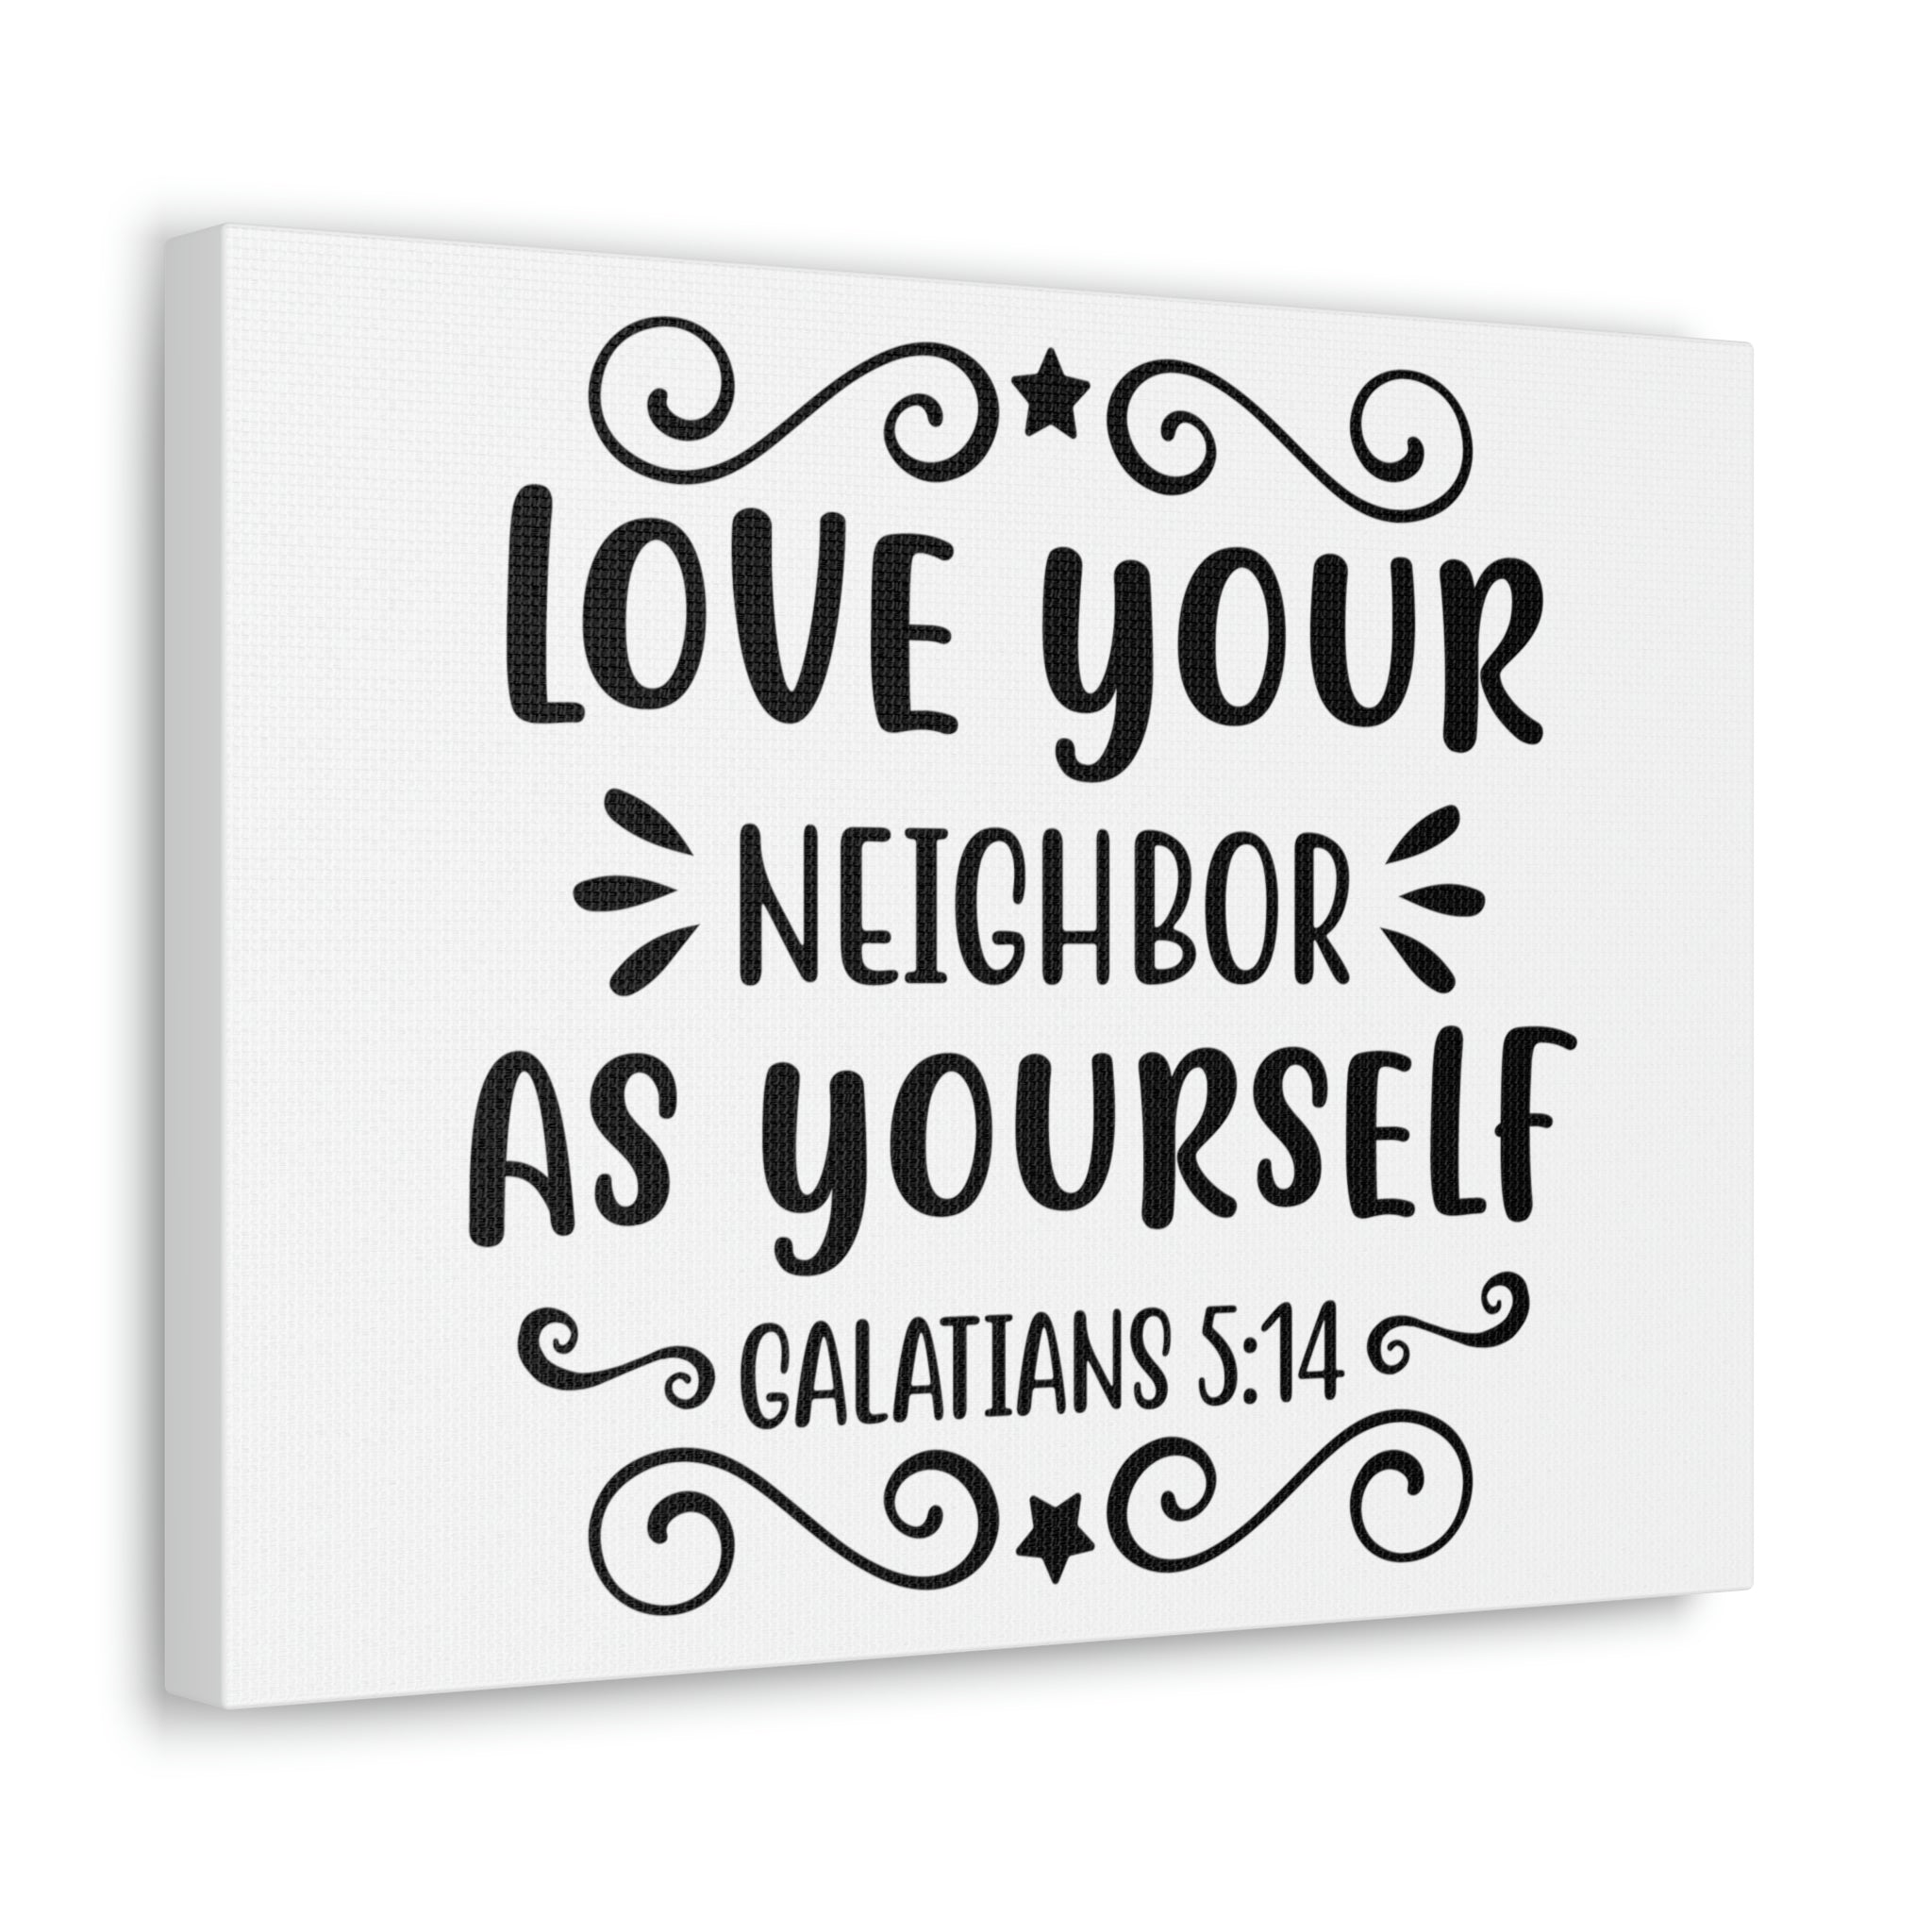 love your neighbor as yourself clipart